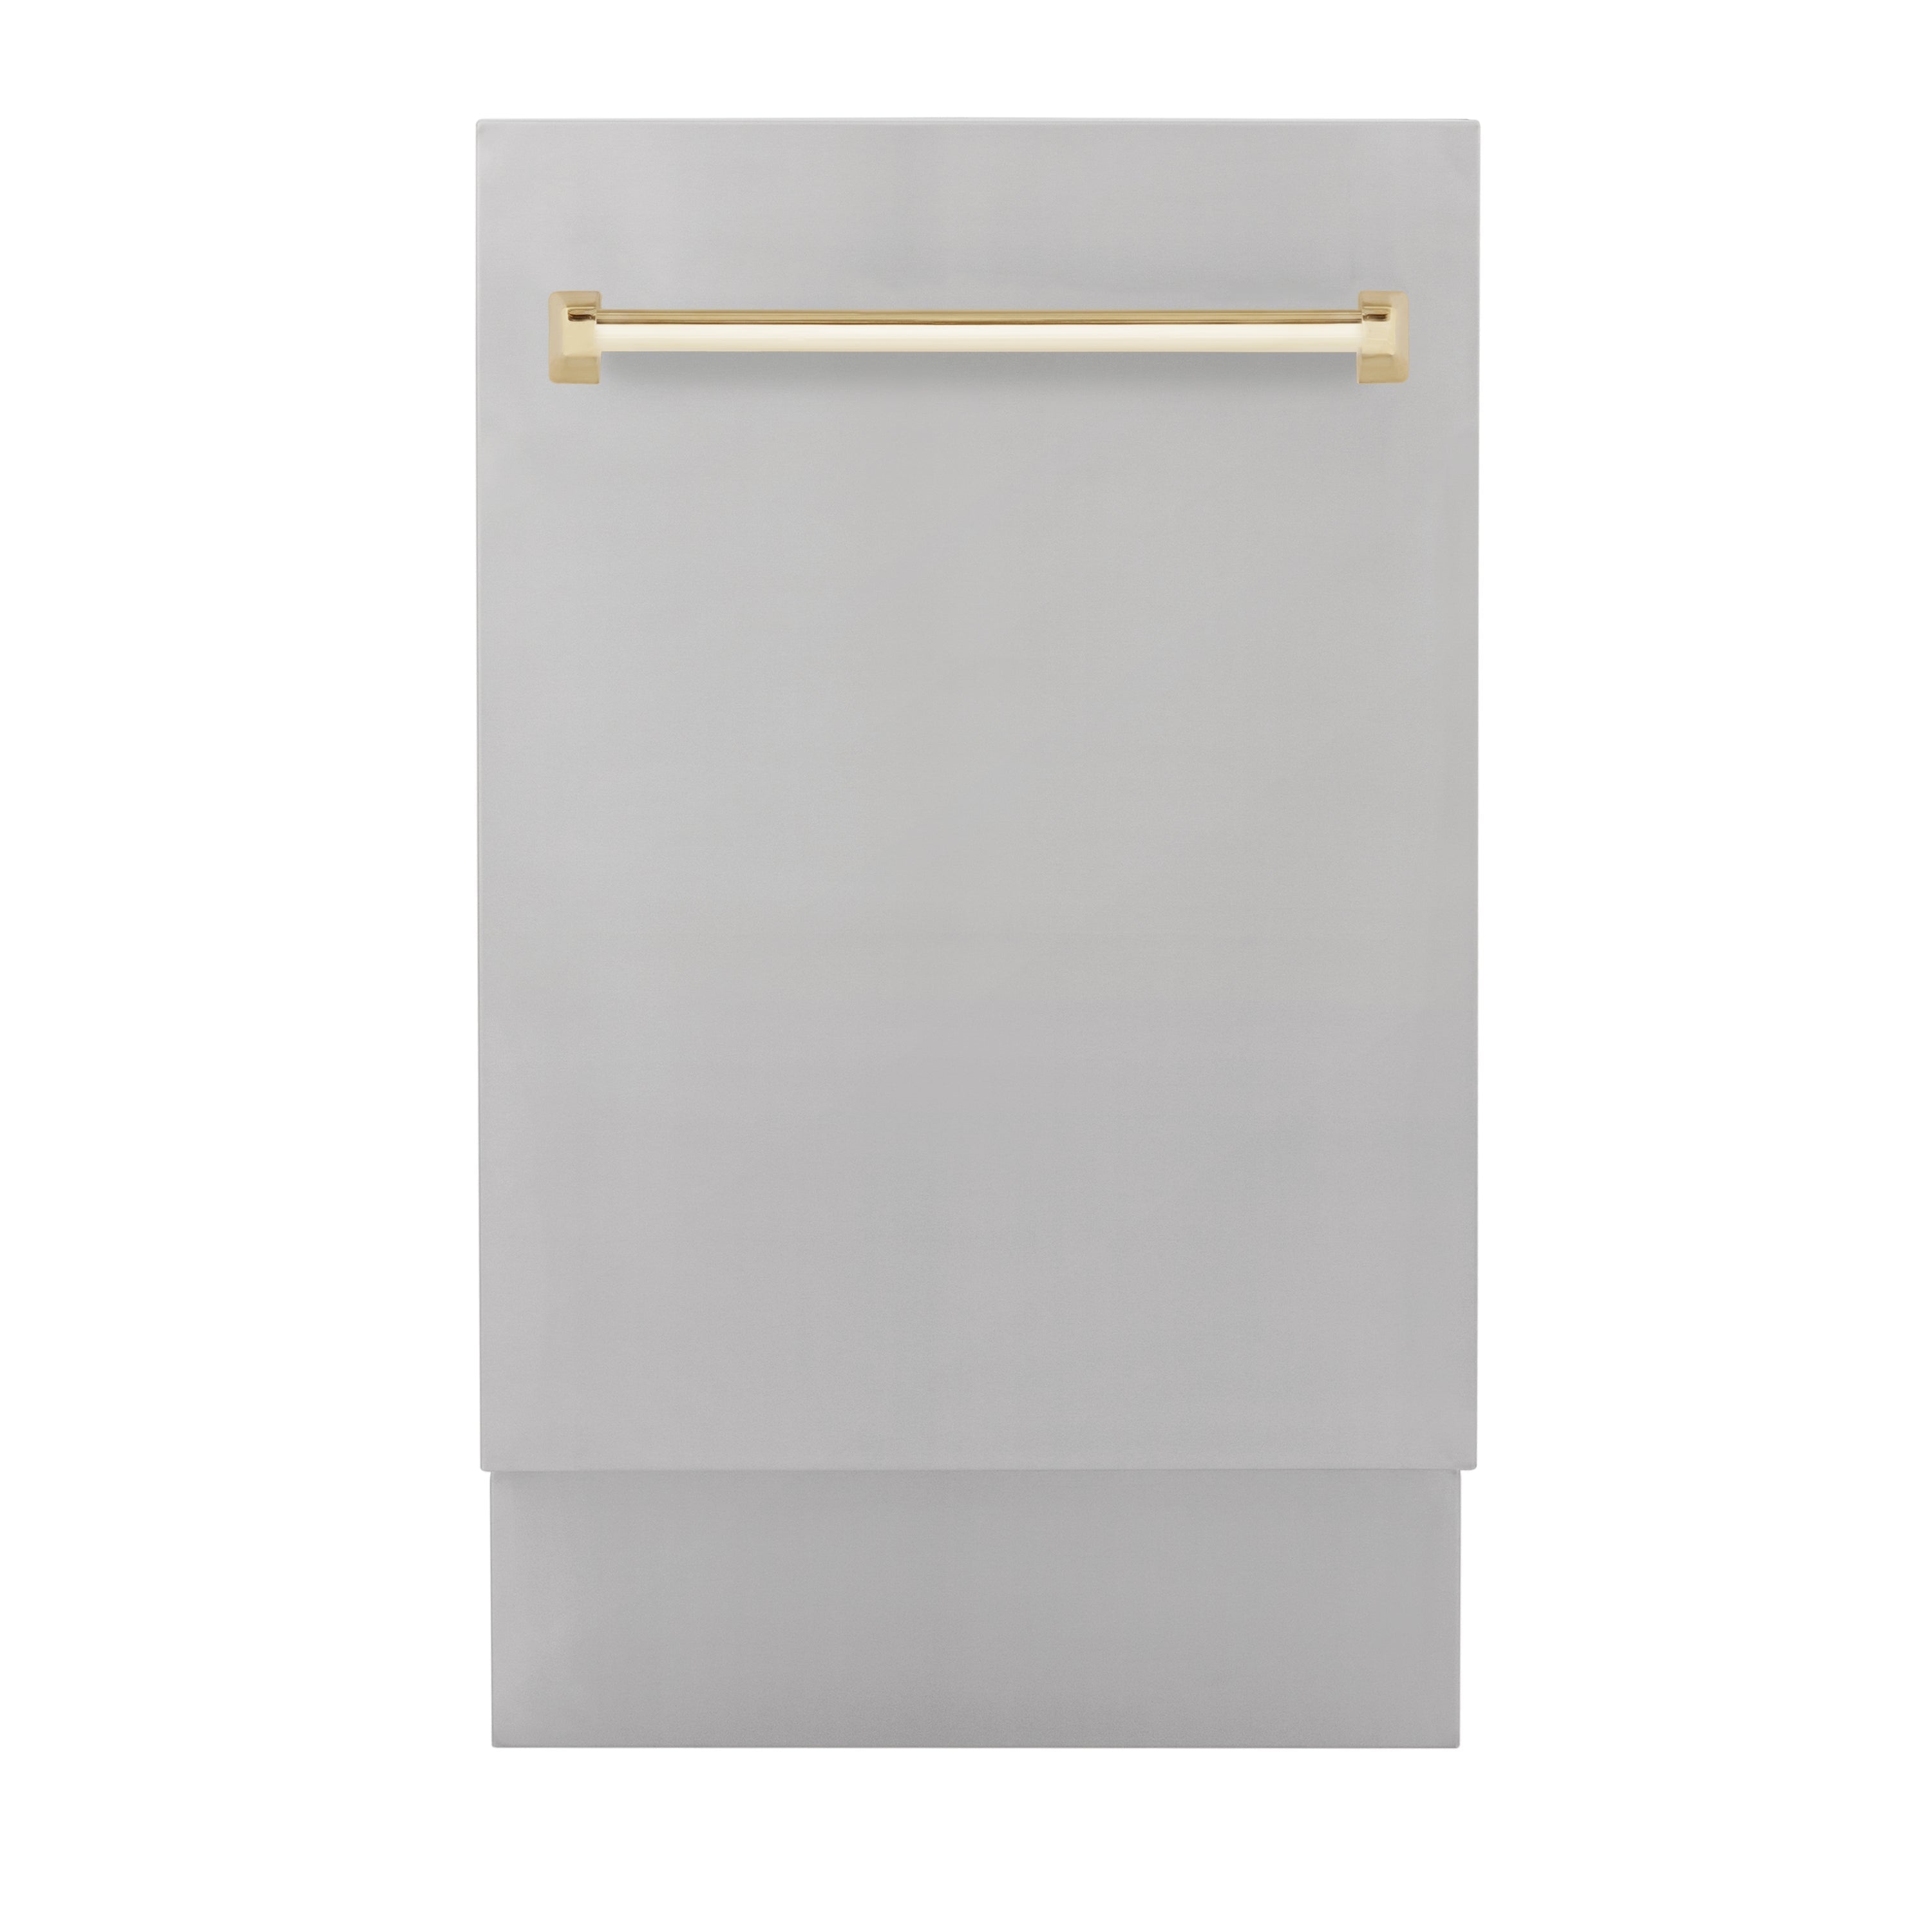 ZLINE Autograph Edition 18 in. Tallac Series 3rd Rack Top Control Built-In Dishwasher in Stainless Steel with Polished Gold Handle, 51dBa (DWVZ-304-18-G) front, closed.